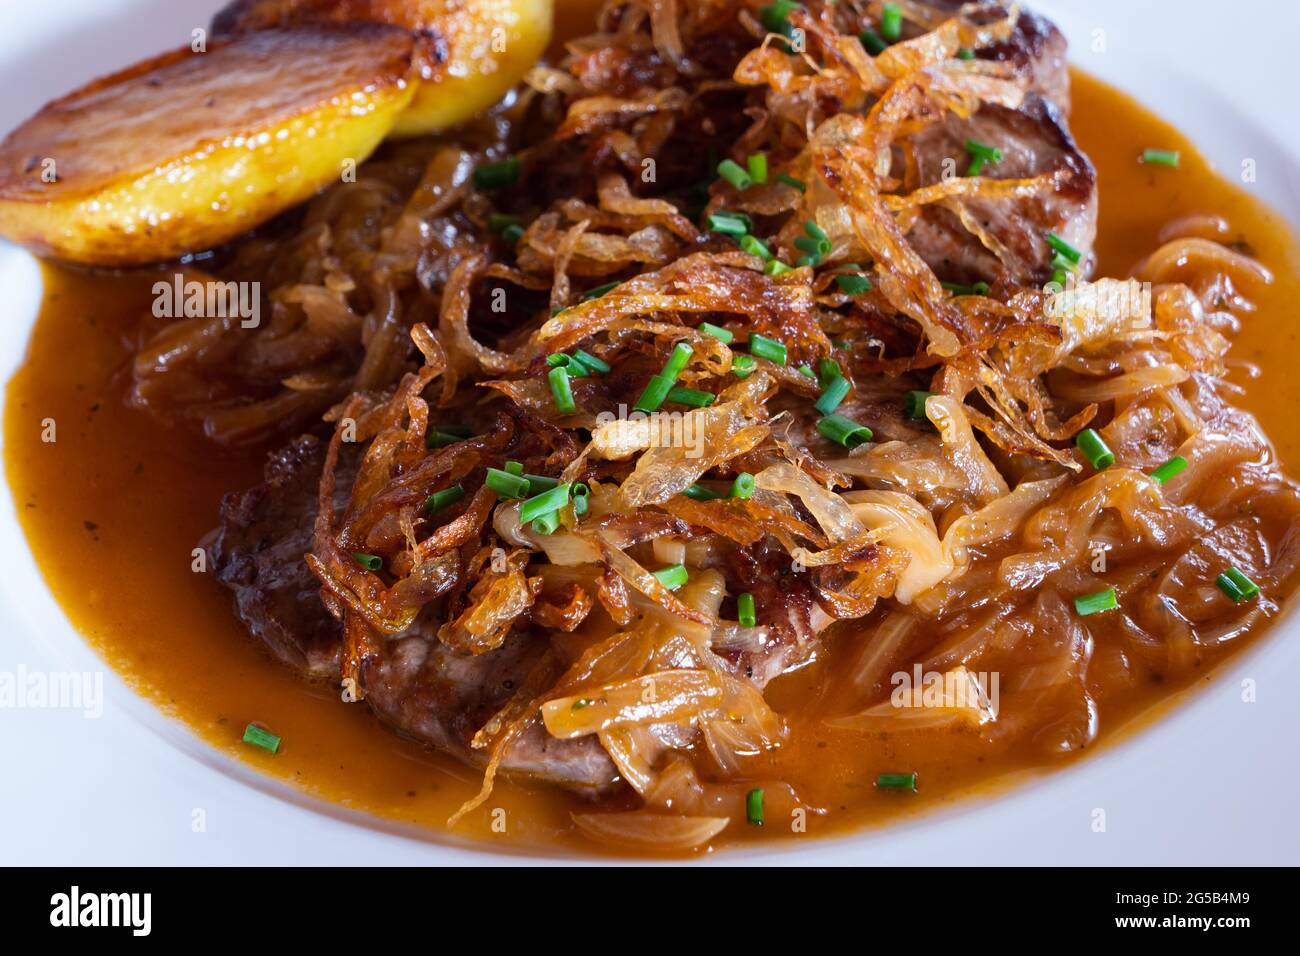 Viennese Zwiebelrostbraten, Sirloin Roast Beef with Onion Gravy, Crispy Fried Onion and Roasted Potatoes Close Up Stock Photo